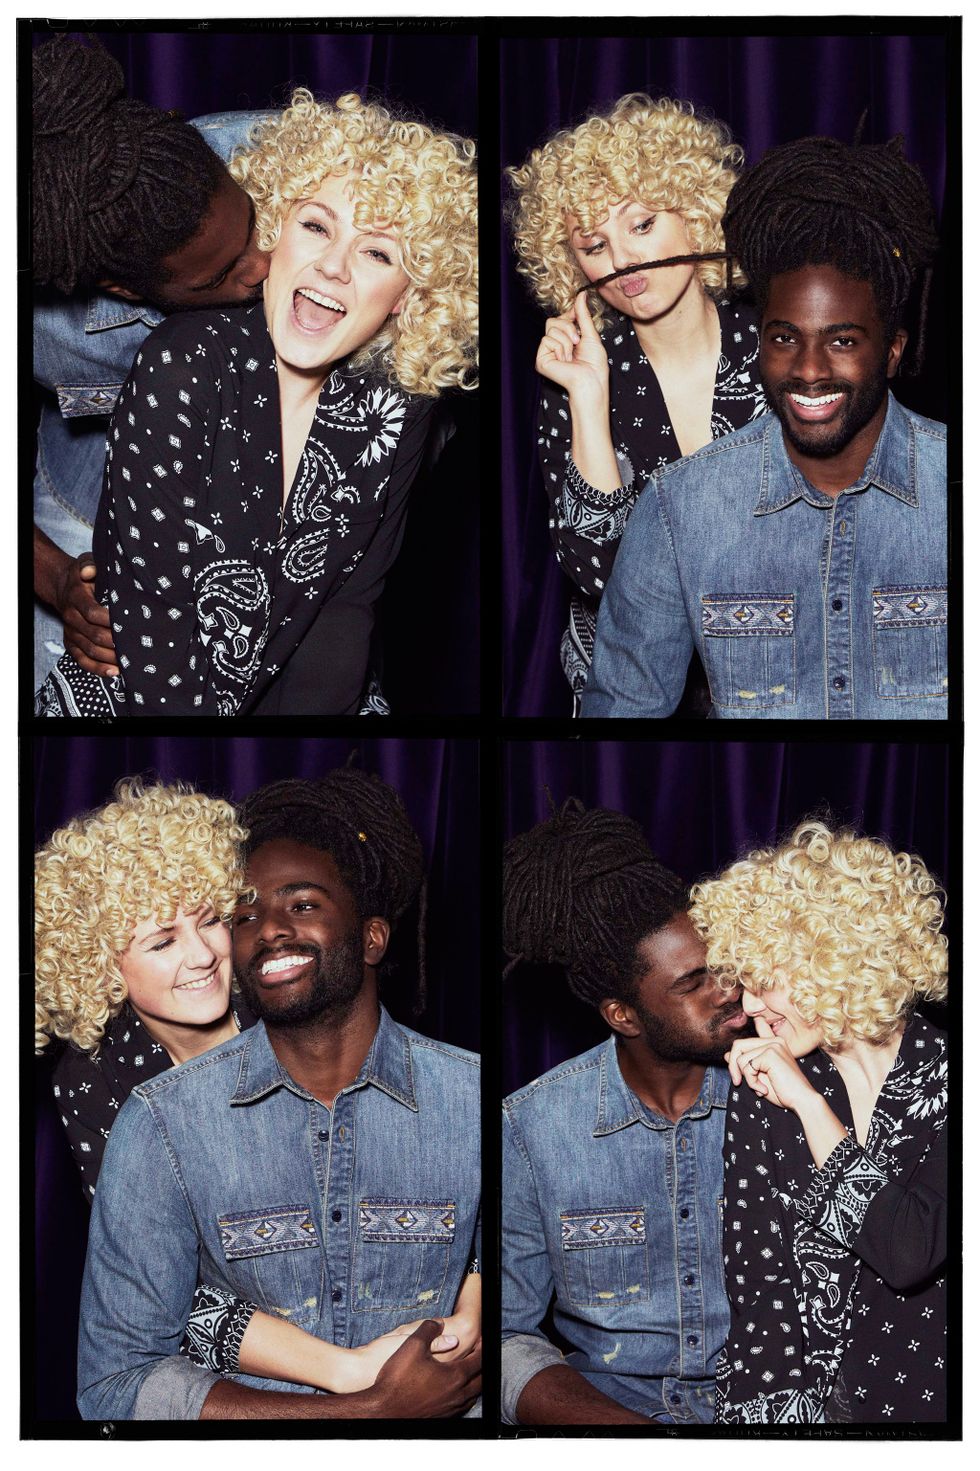 Hair, Hairstyle, Afro, Blond, Jeans, Denim, Human, Fashion, Wig, Cool, 